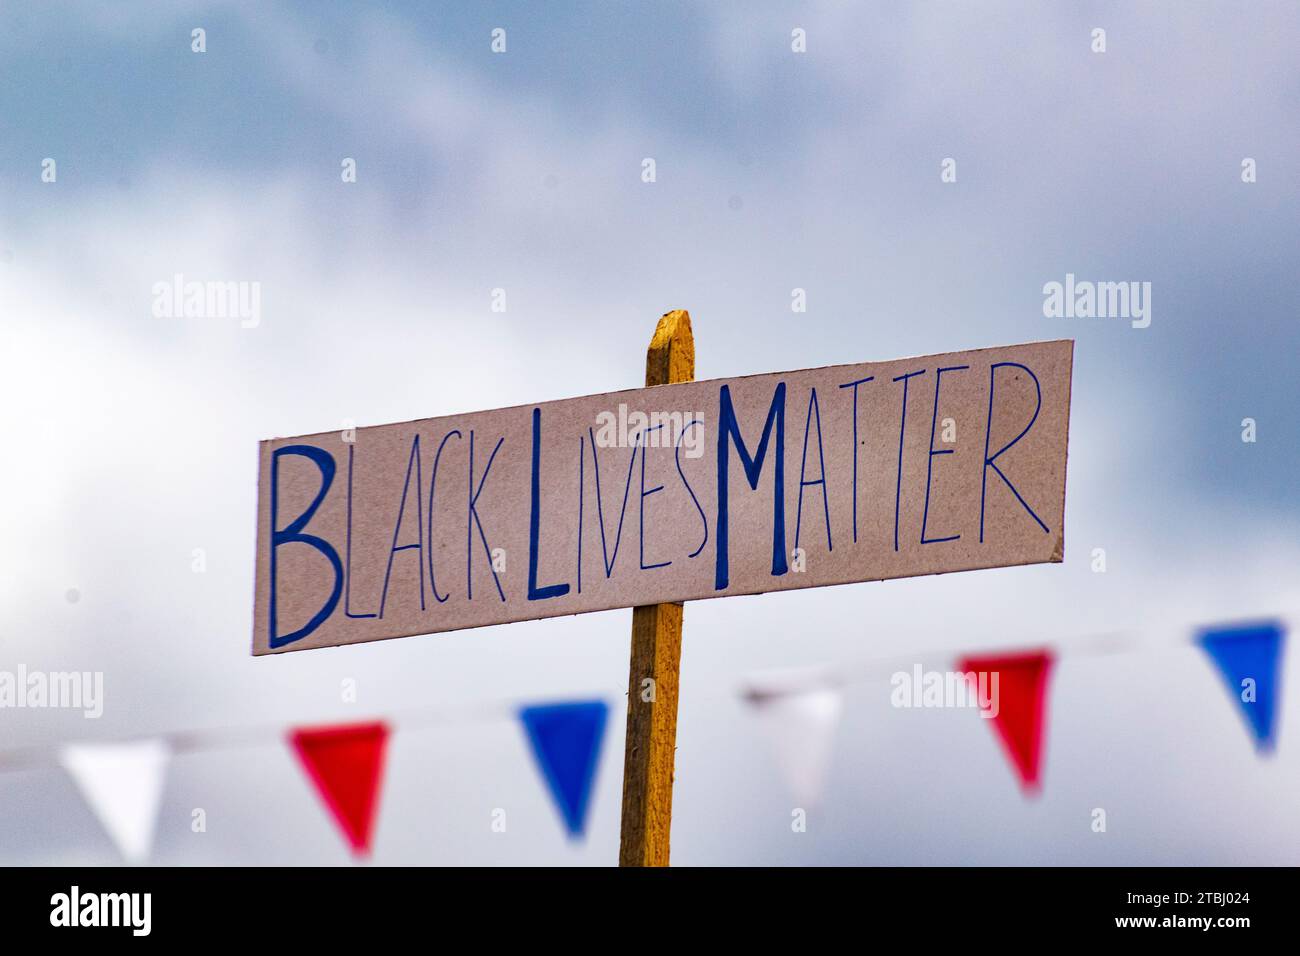 Cornwall responds to the Black Lives Matter movement in Truro. Stock Photo